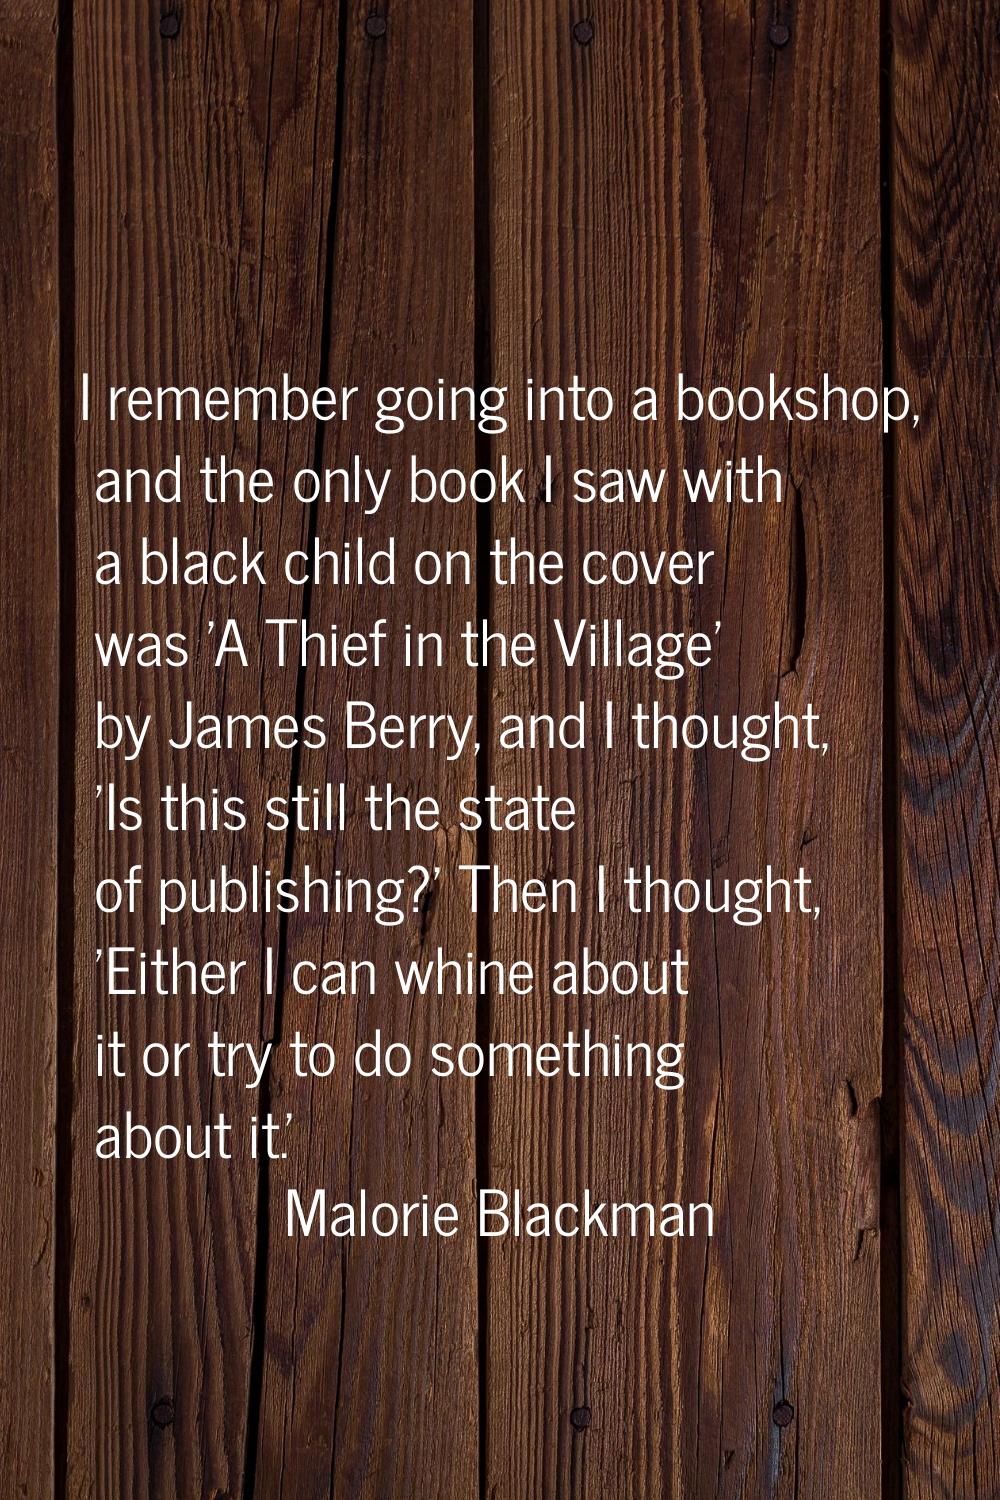 I remember going into a bookshop, and the only book I saw with a black child on the cover was 'A Th